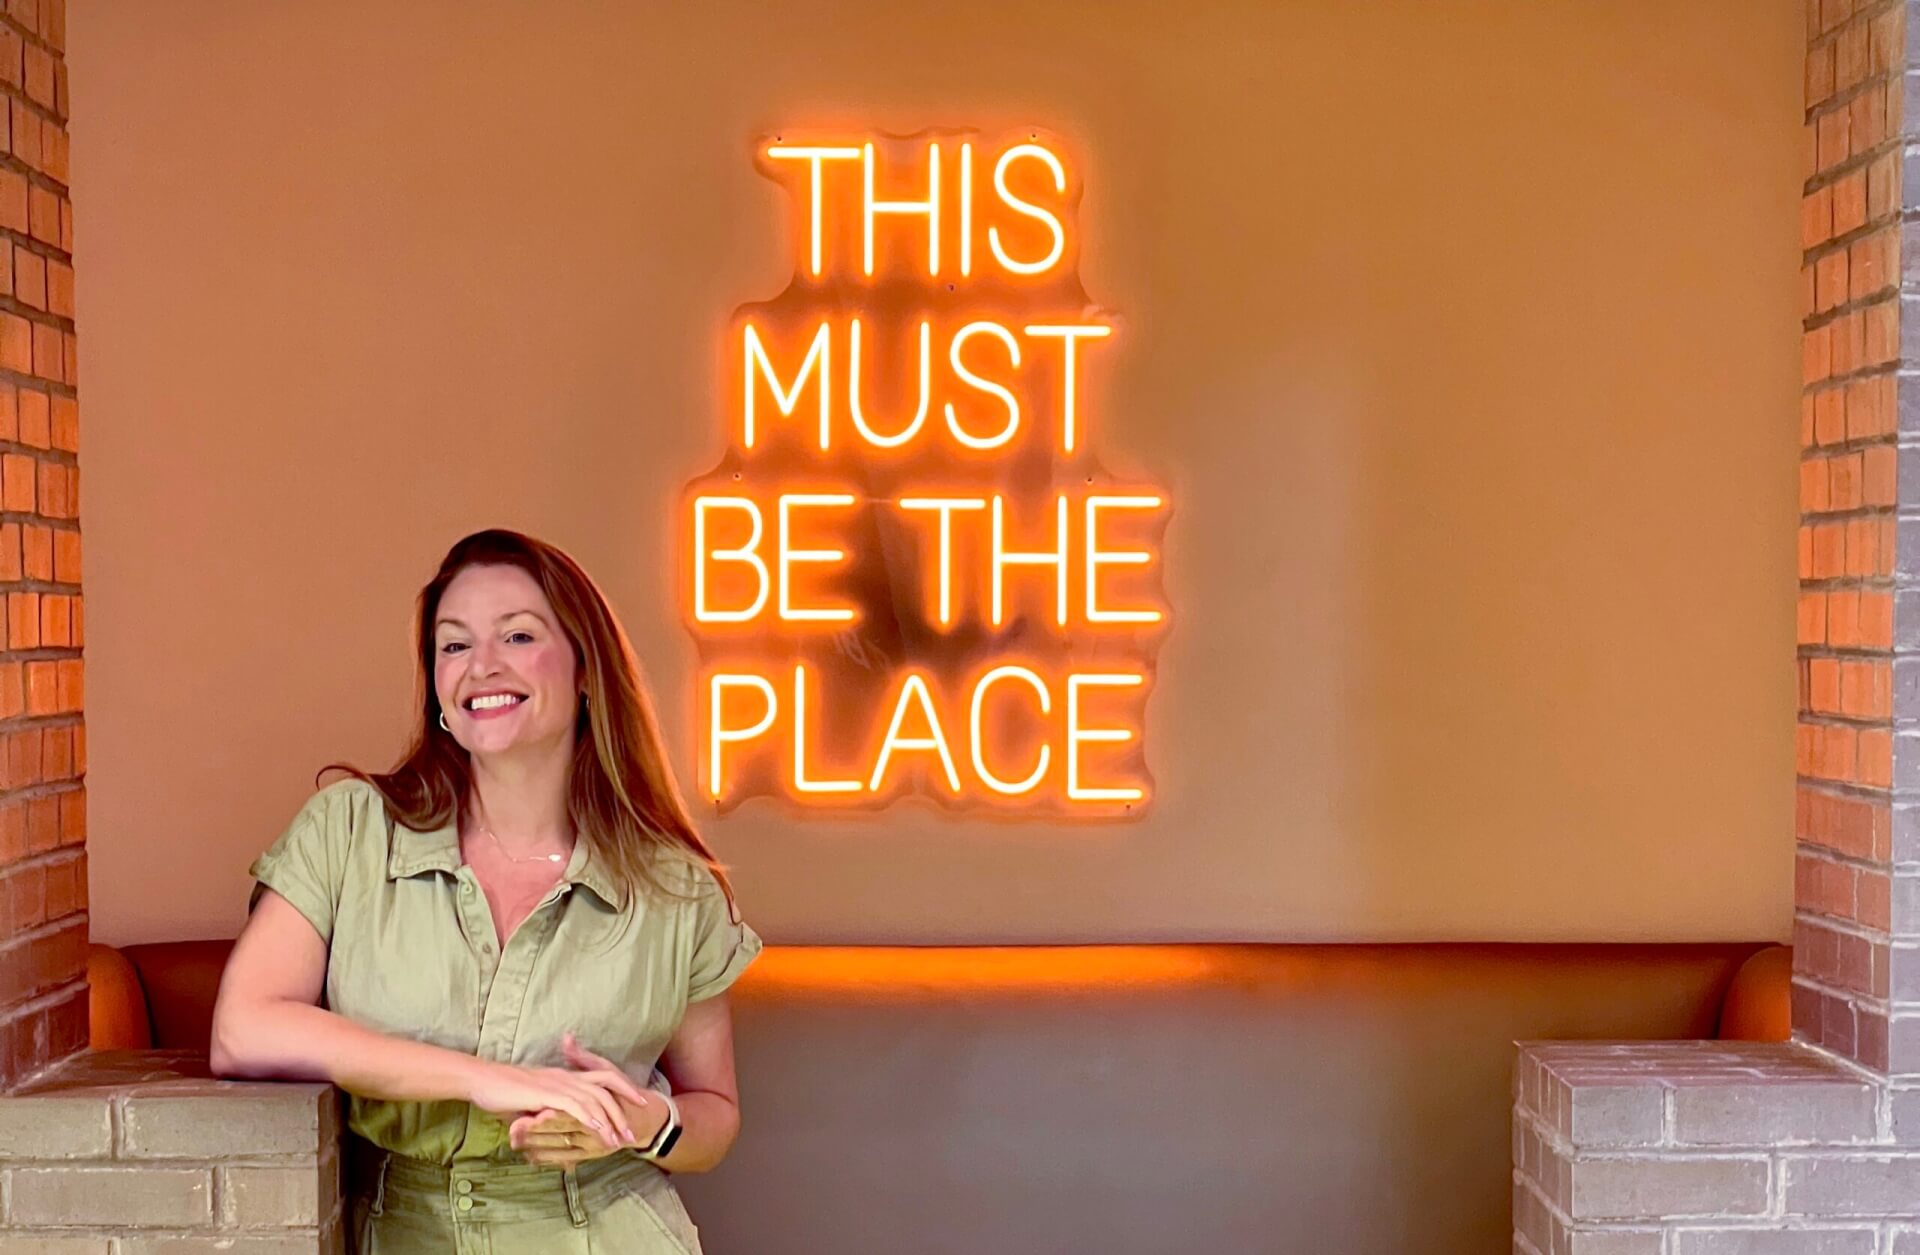 Holly Hessler standing in front of the neon "This Must Be The Place" sign.